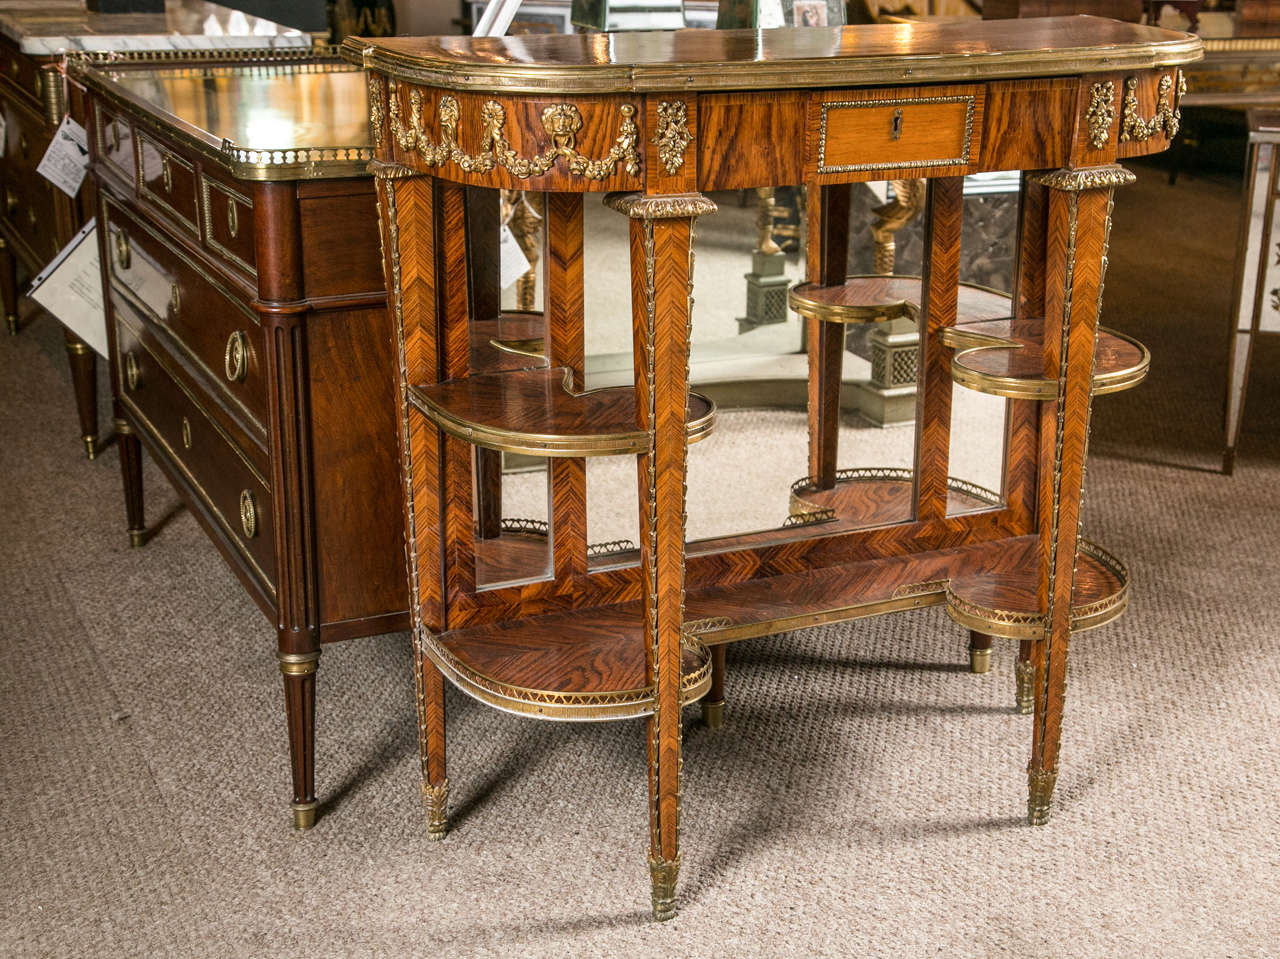 Rosewood mirrored back console table. In the style of Louis XVI, this fine piece has richly hued timbers with brownish and darker veining. Bronze-mounted dessert serving cart or console table. Attributed to Maison Jansen.